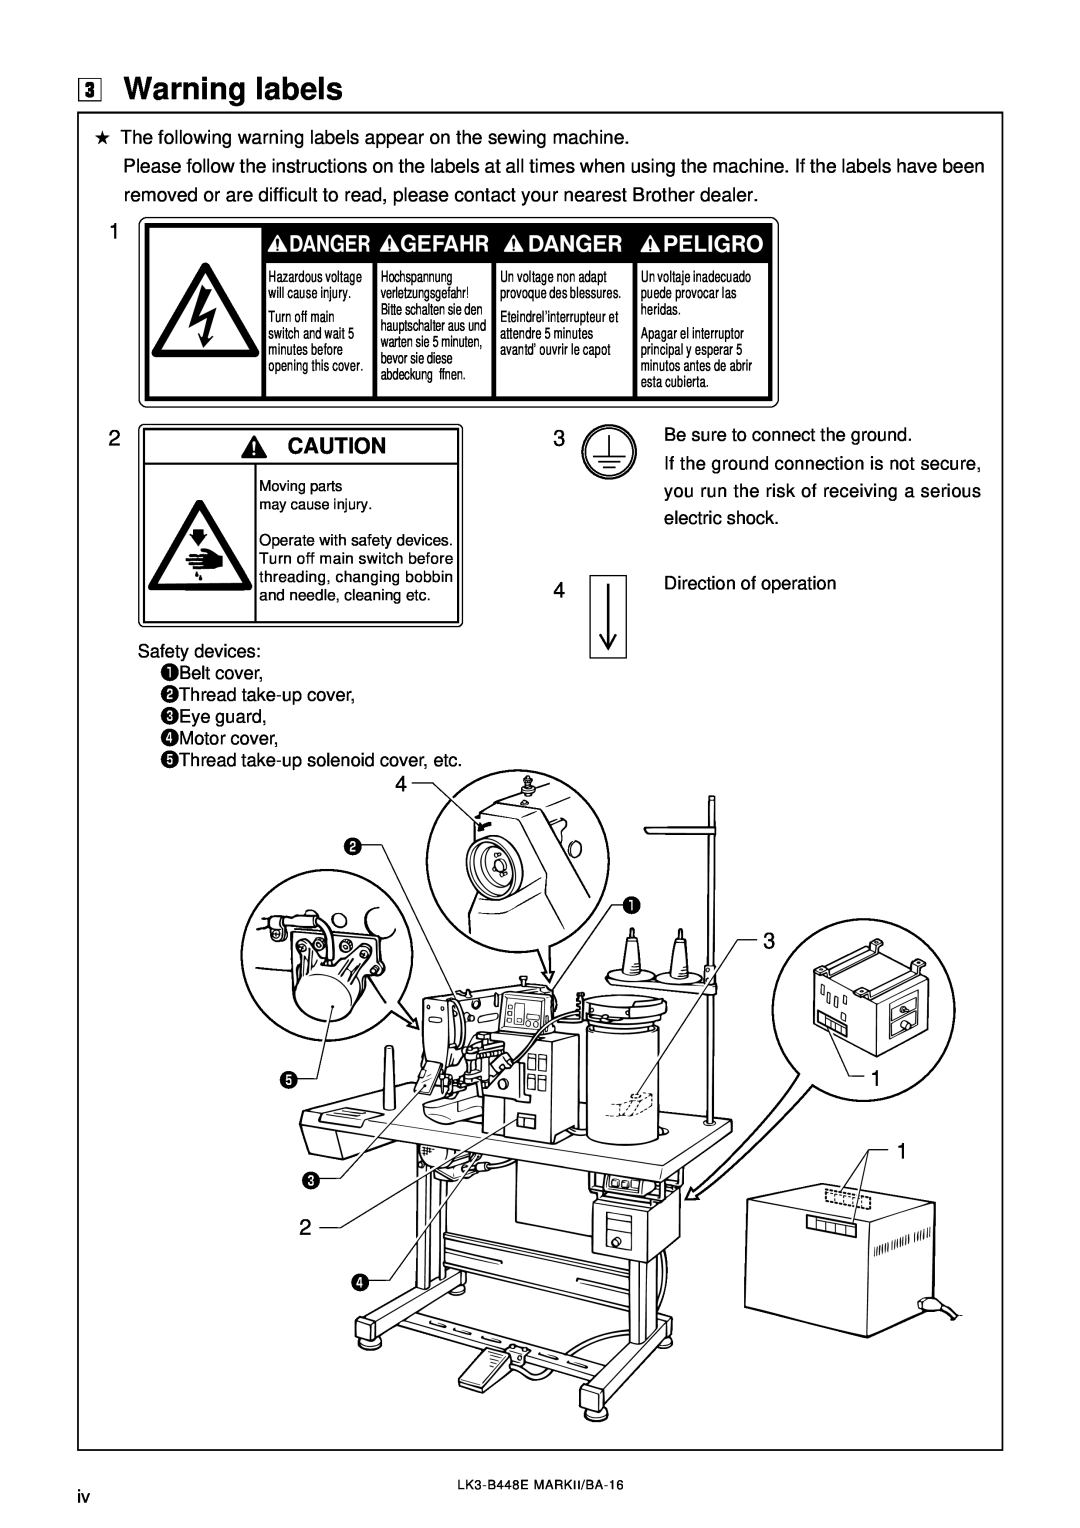 Brother c Warning labels, The following warning labels appear on the sewing machine, LK3-B448E MARKII/BA-16 